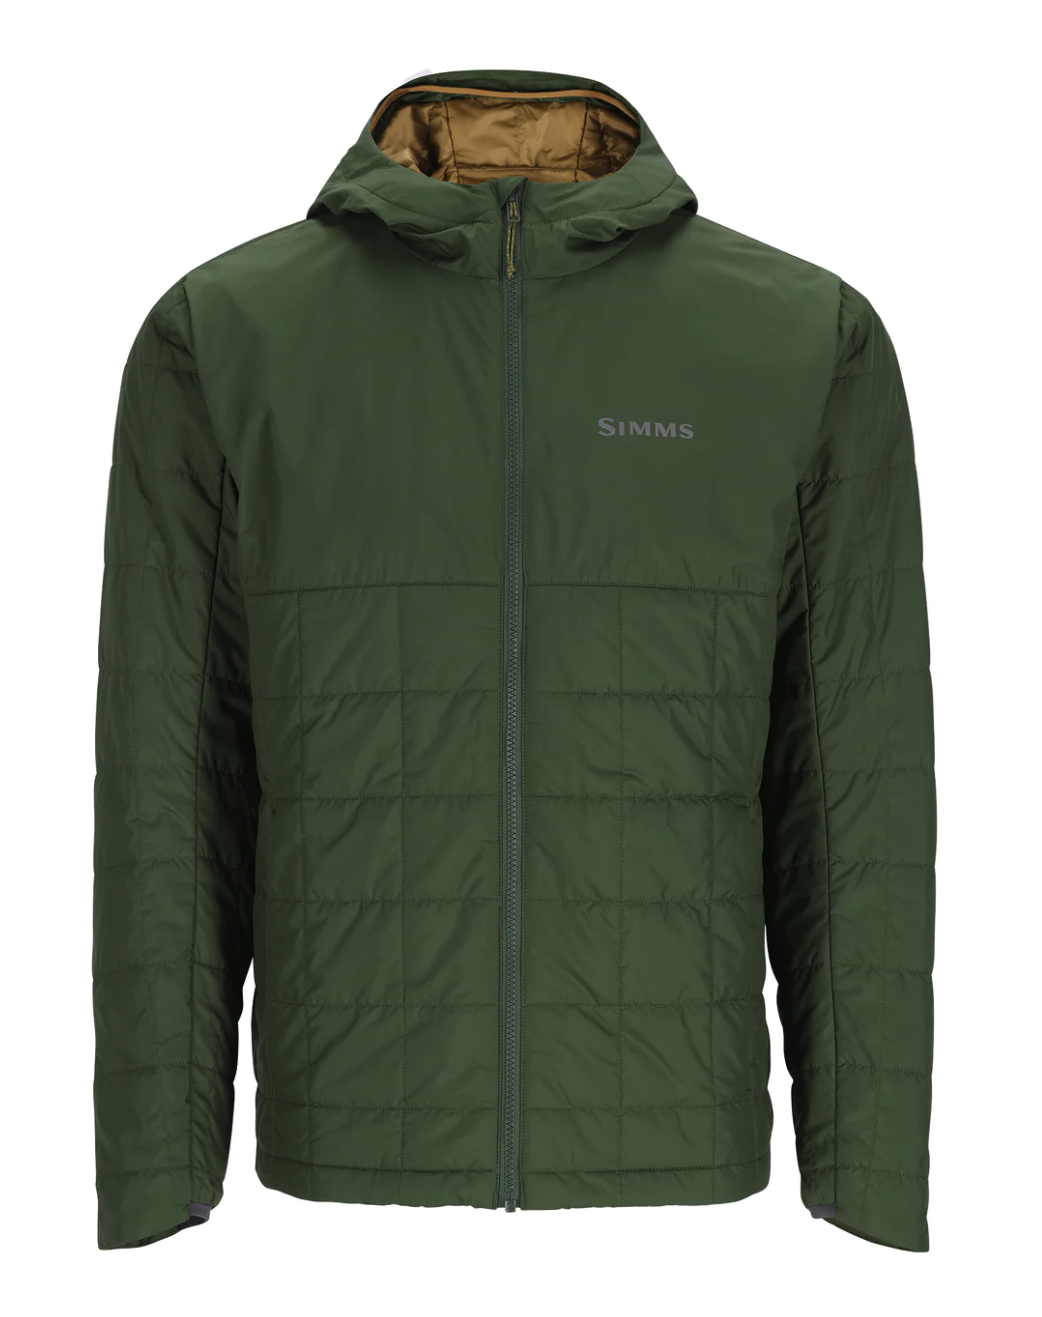 Simms Fishing Fall Run Hoody for sale online is a best cold weather fishing jacket.